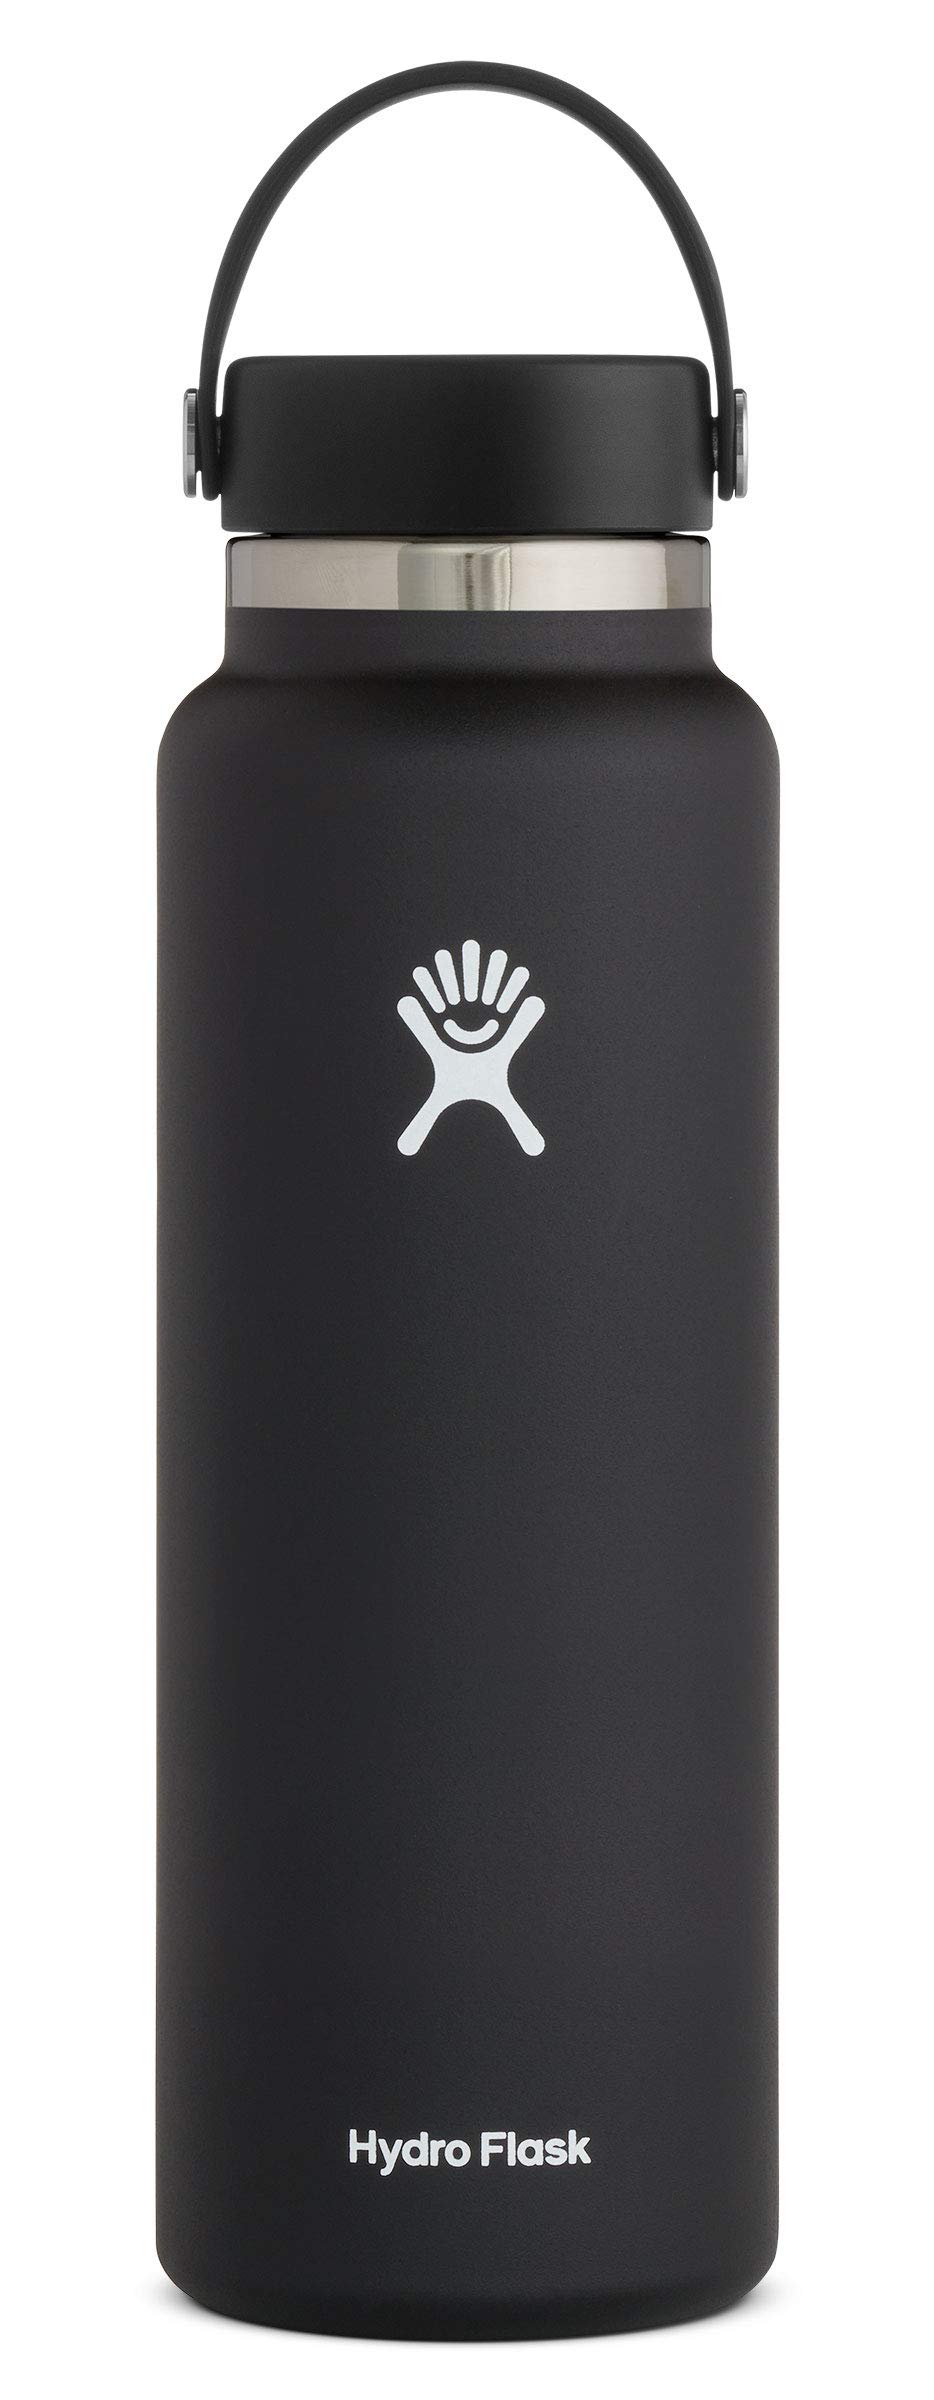 Hydro Flask 40 oz Wide Mouth Water Bottle with Flex Cap - Black